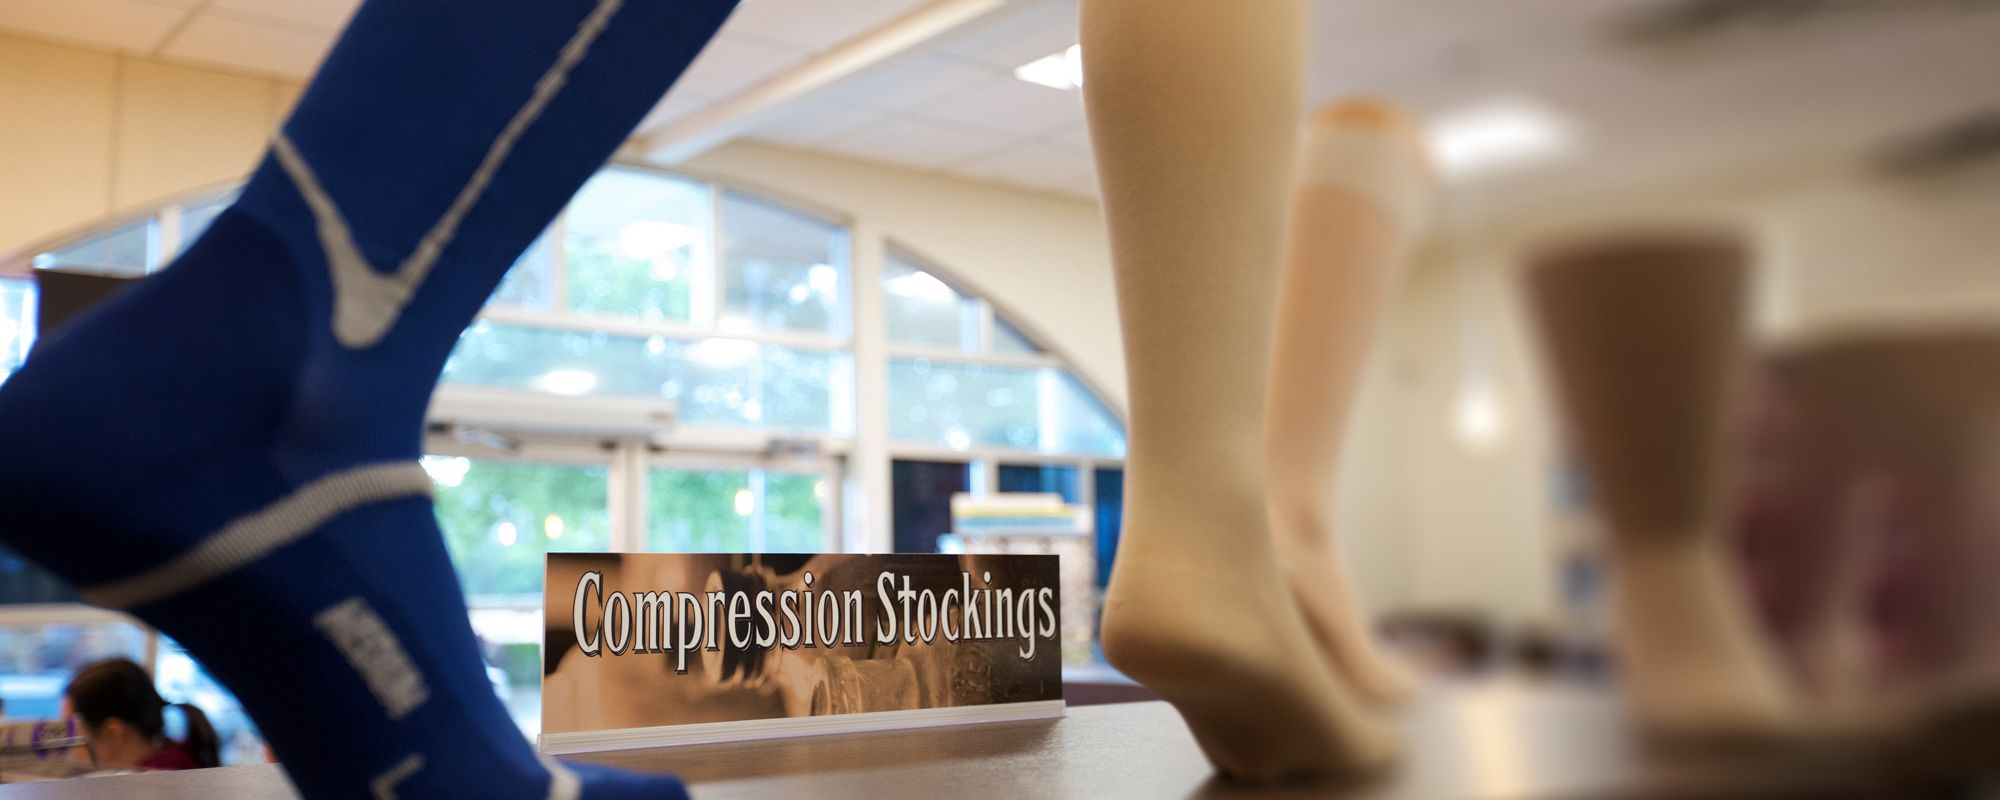 Compression Therapy image